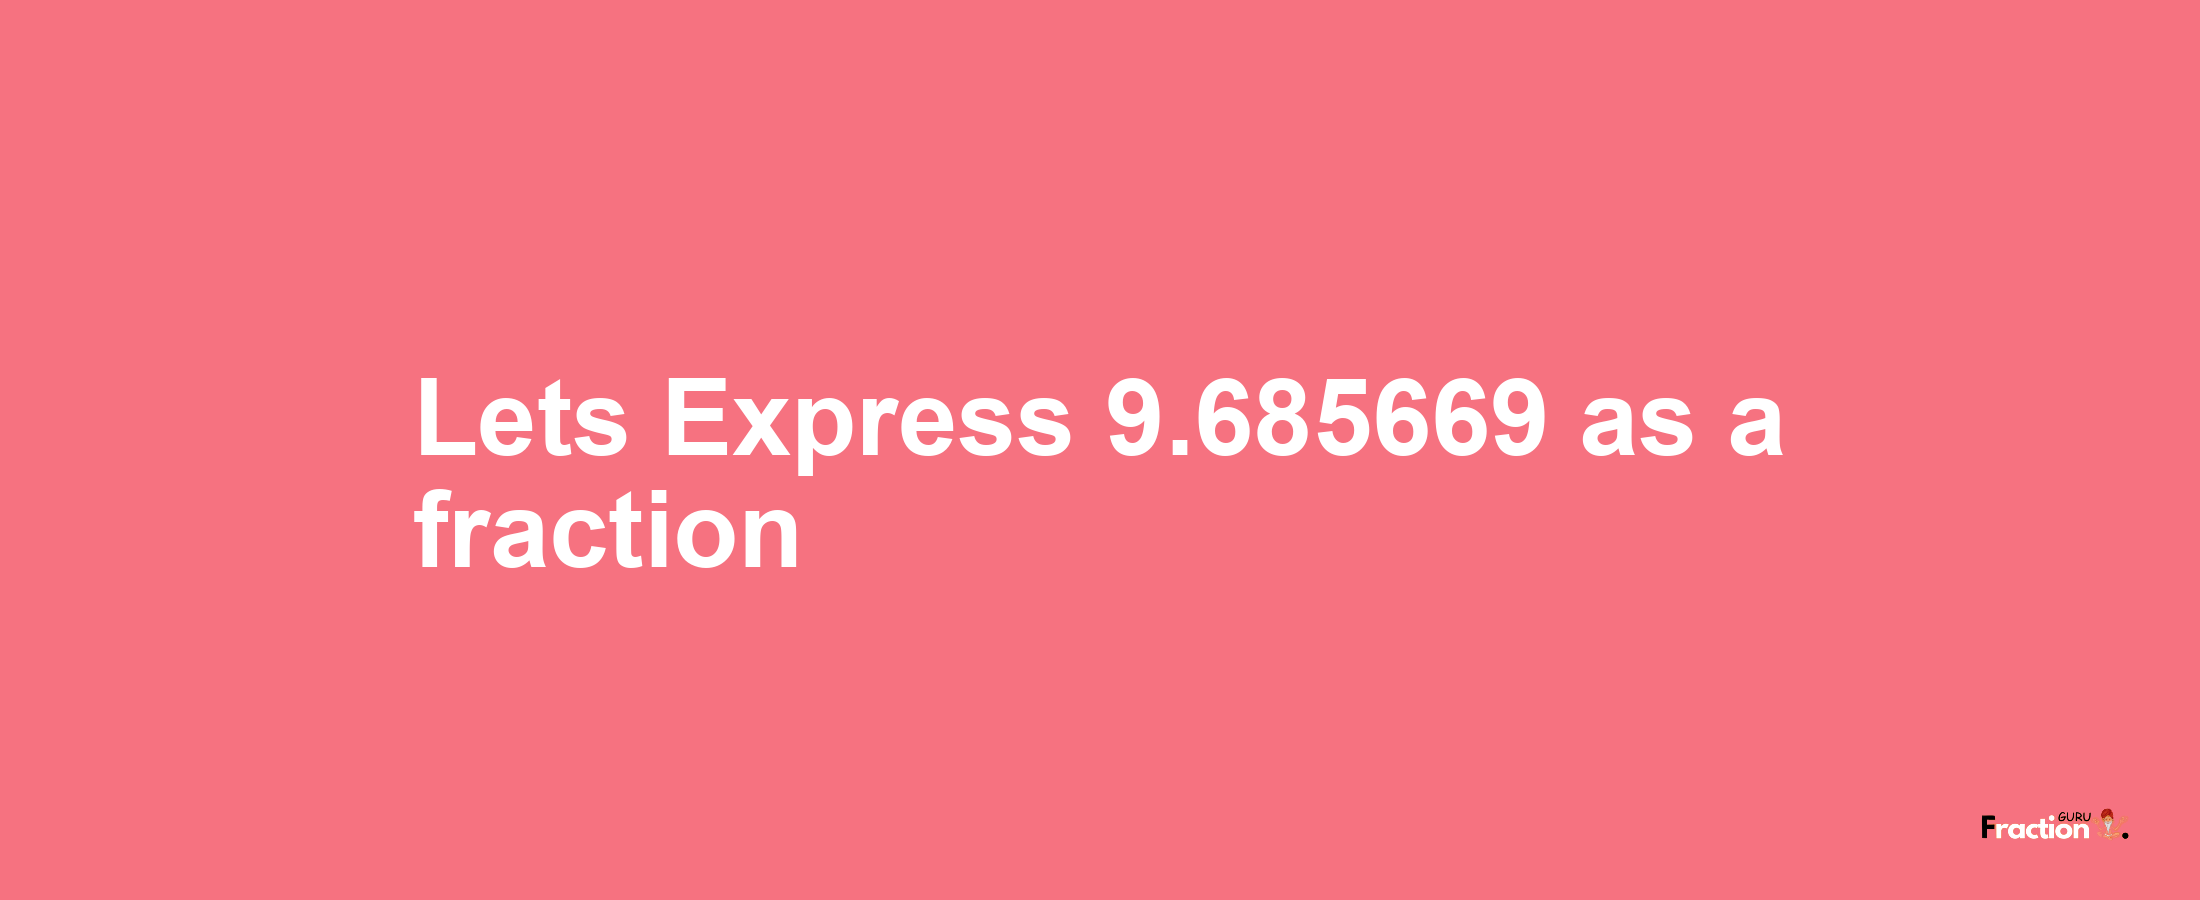 Lets Express 9.685669 as afraction